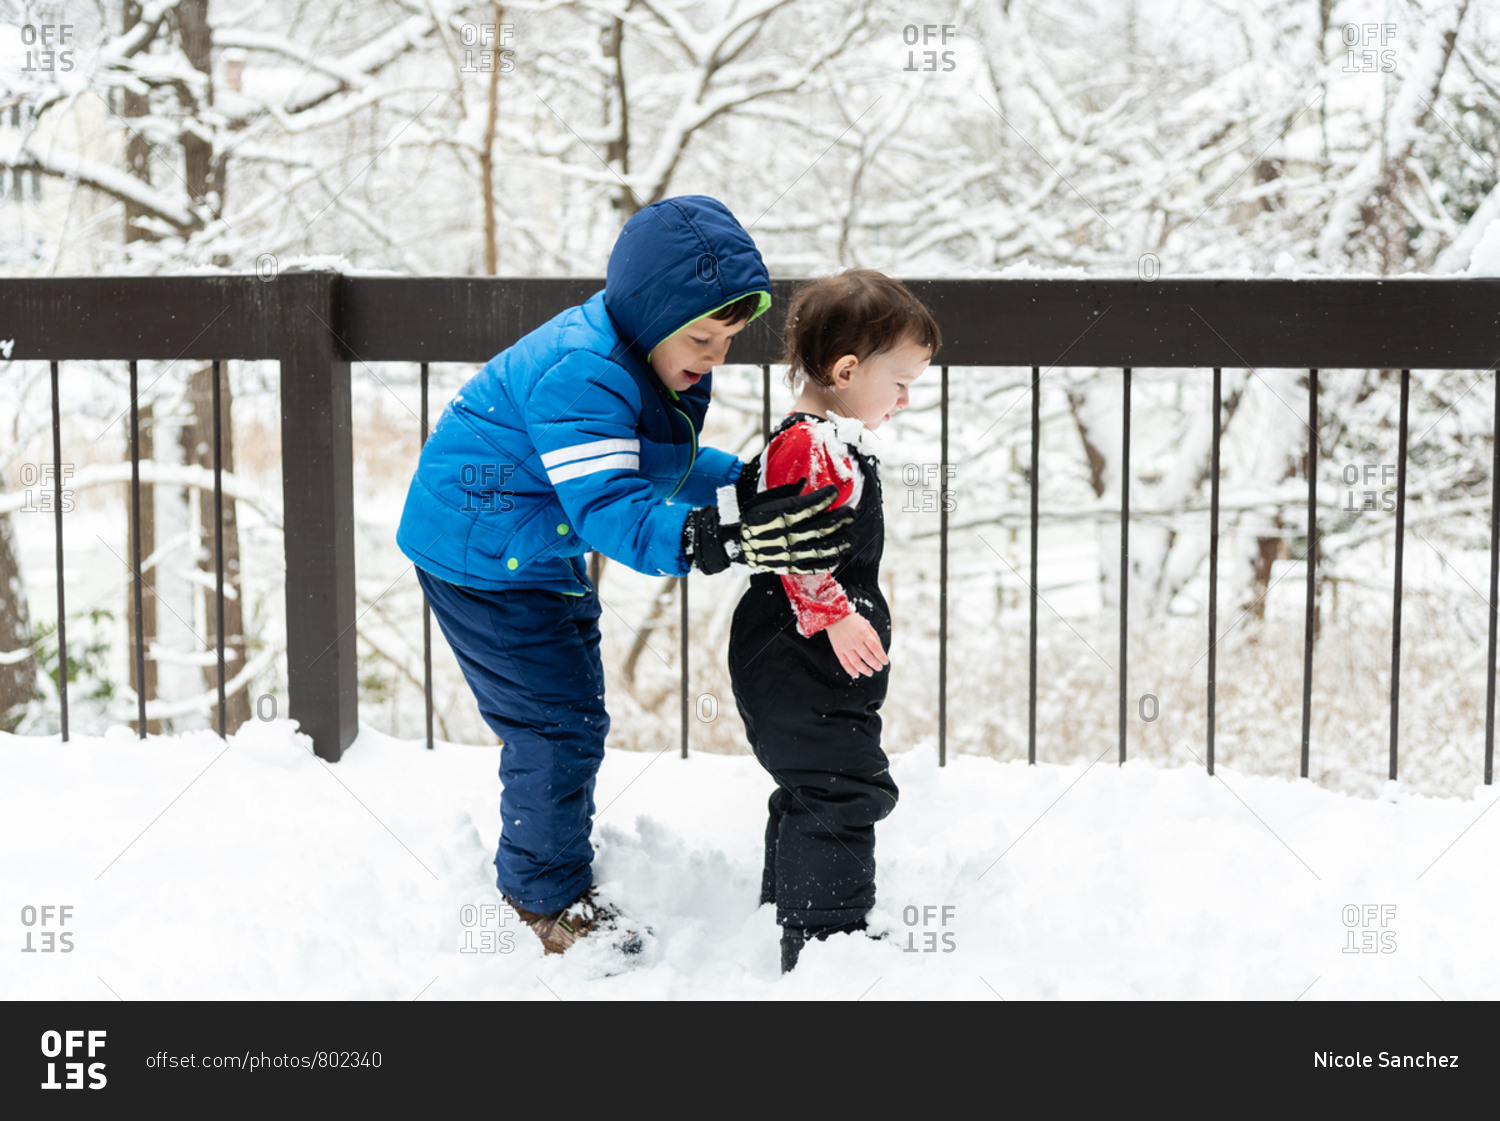 Two boys playing in the snow on a snowy deck